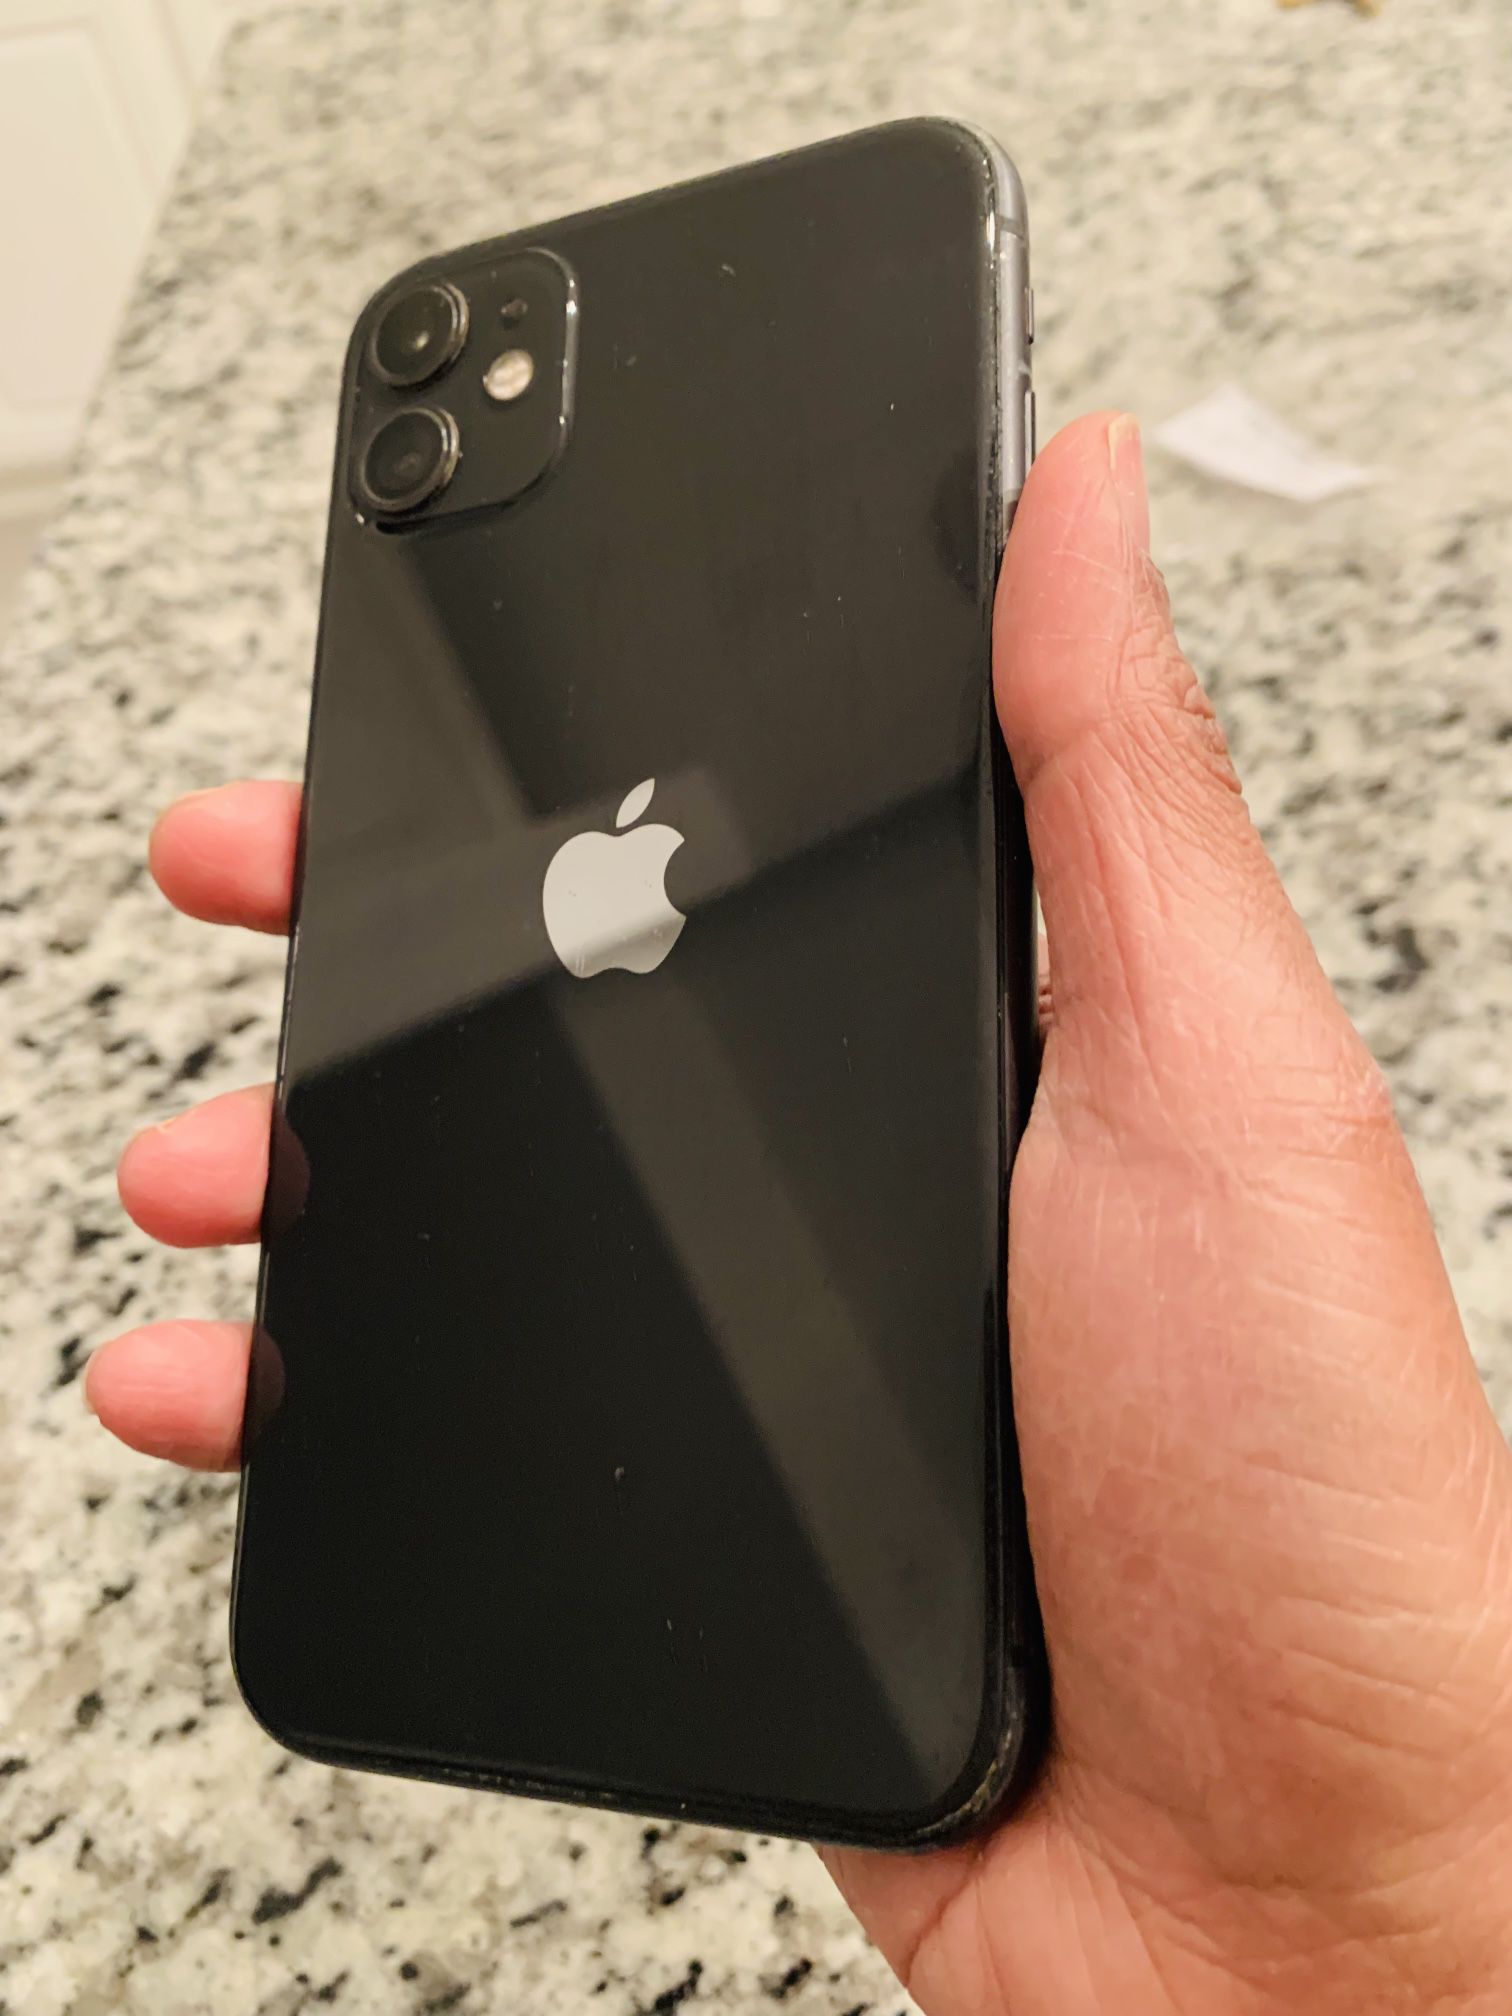 iPhone 11 Unlocked / Factory Unlocked For Any Carrier Starting 